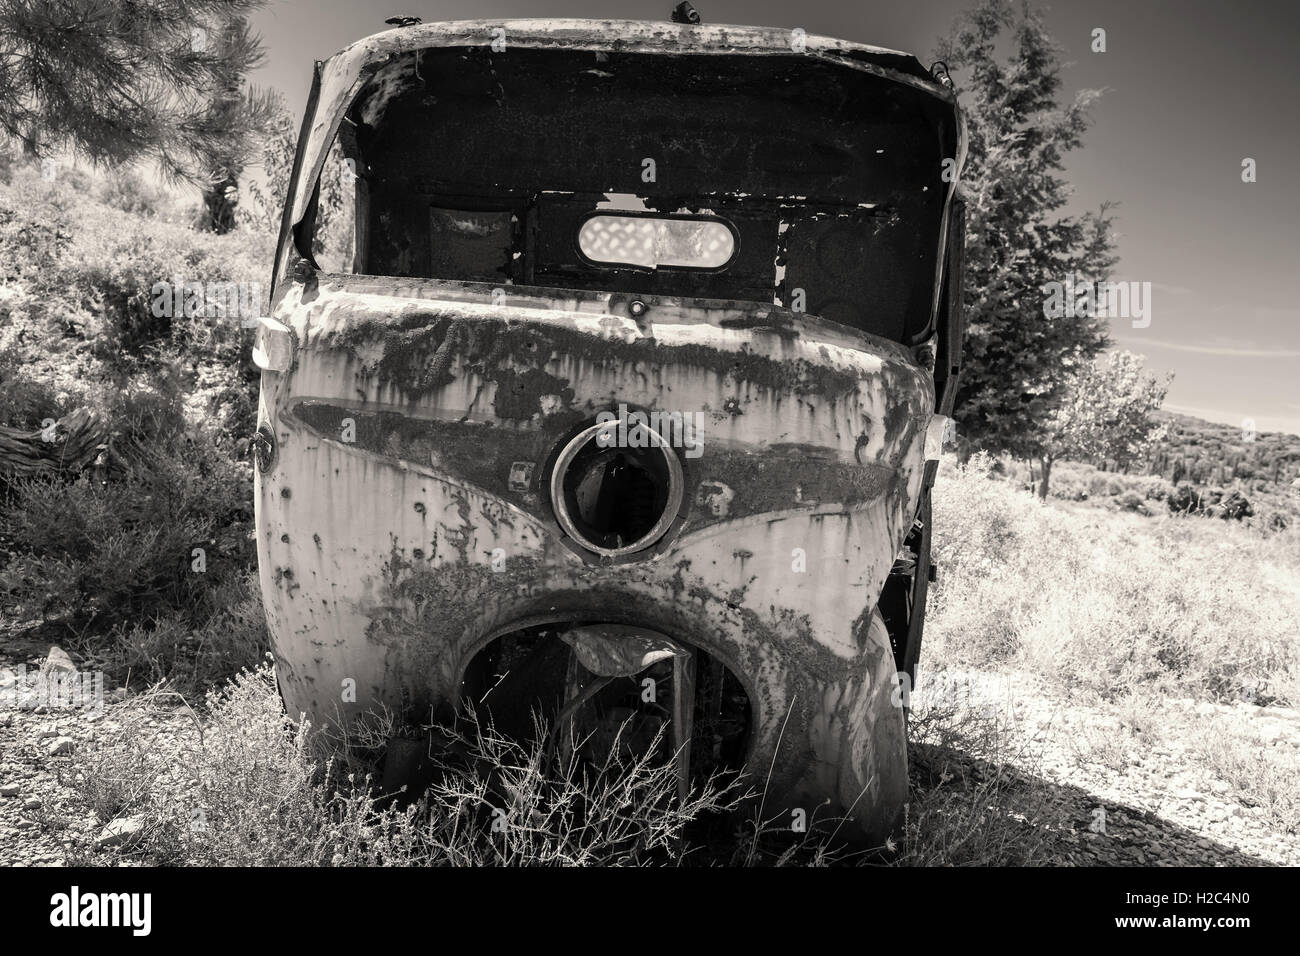 Abandoned rusted body of three-wheeled light commercial vehicle, old style filter effect, monochrome retro photo Stock Photo